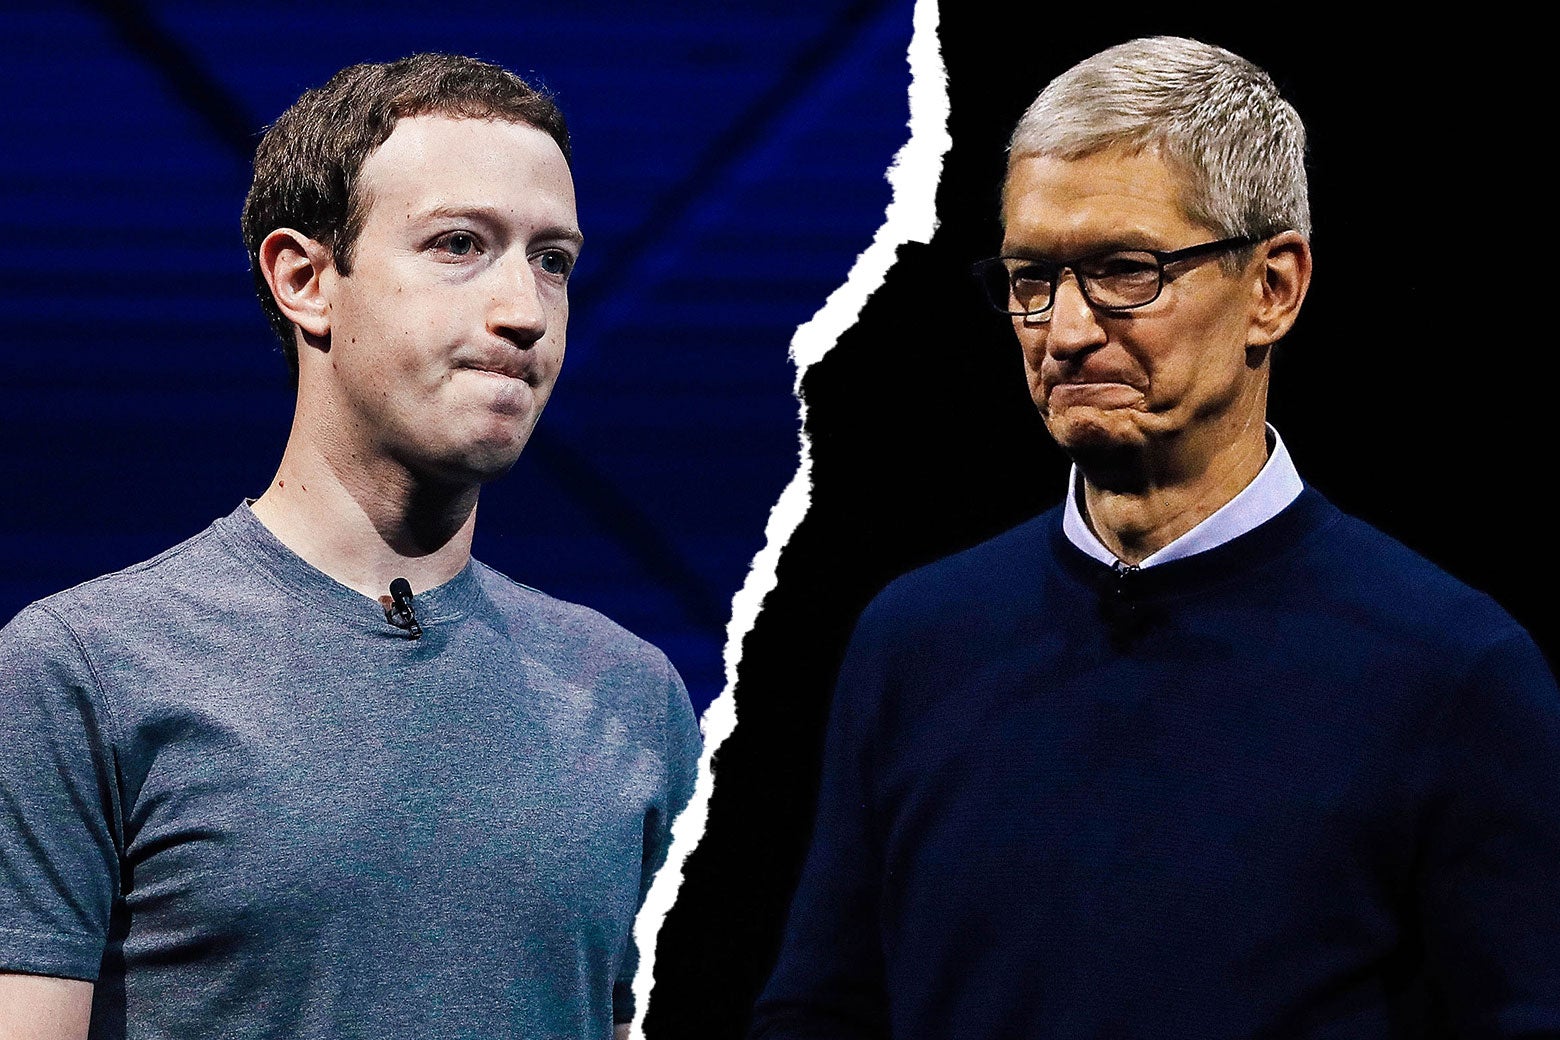 Mark Zuckerberg and Tim Cook, pictured on two sides of a torn image.